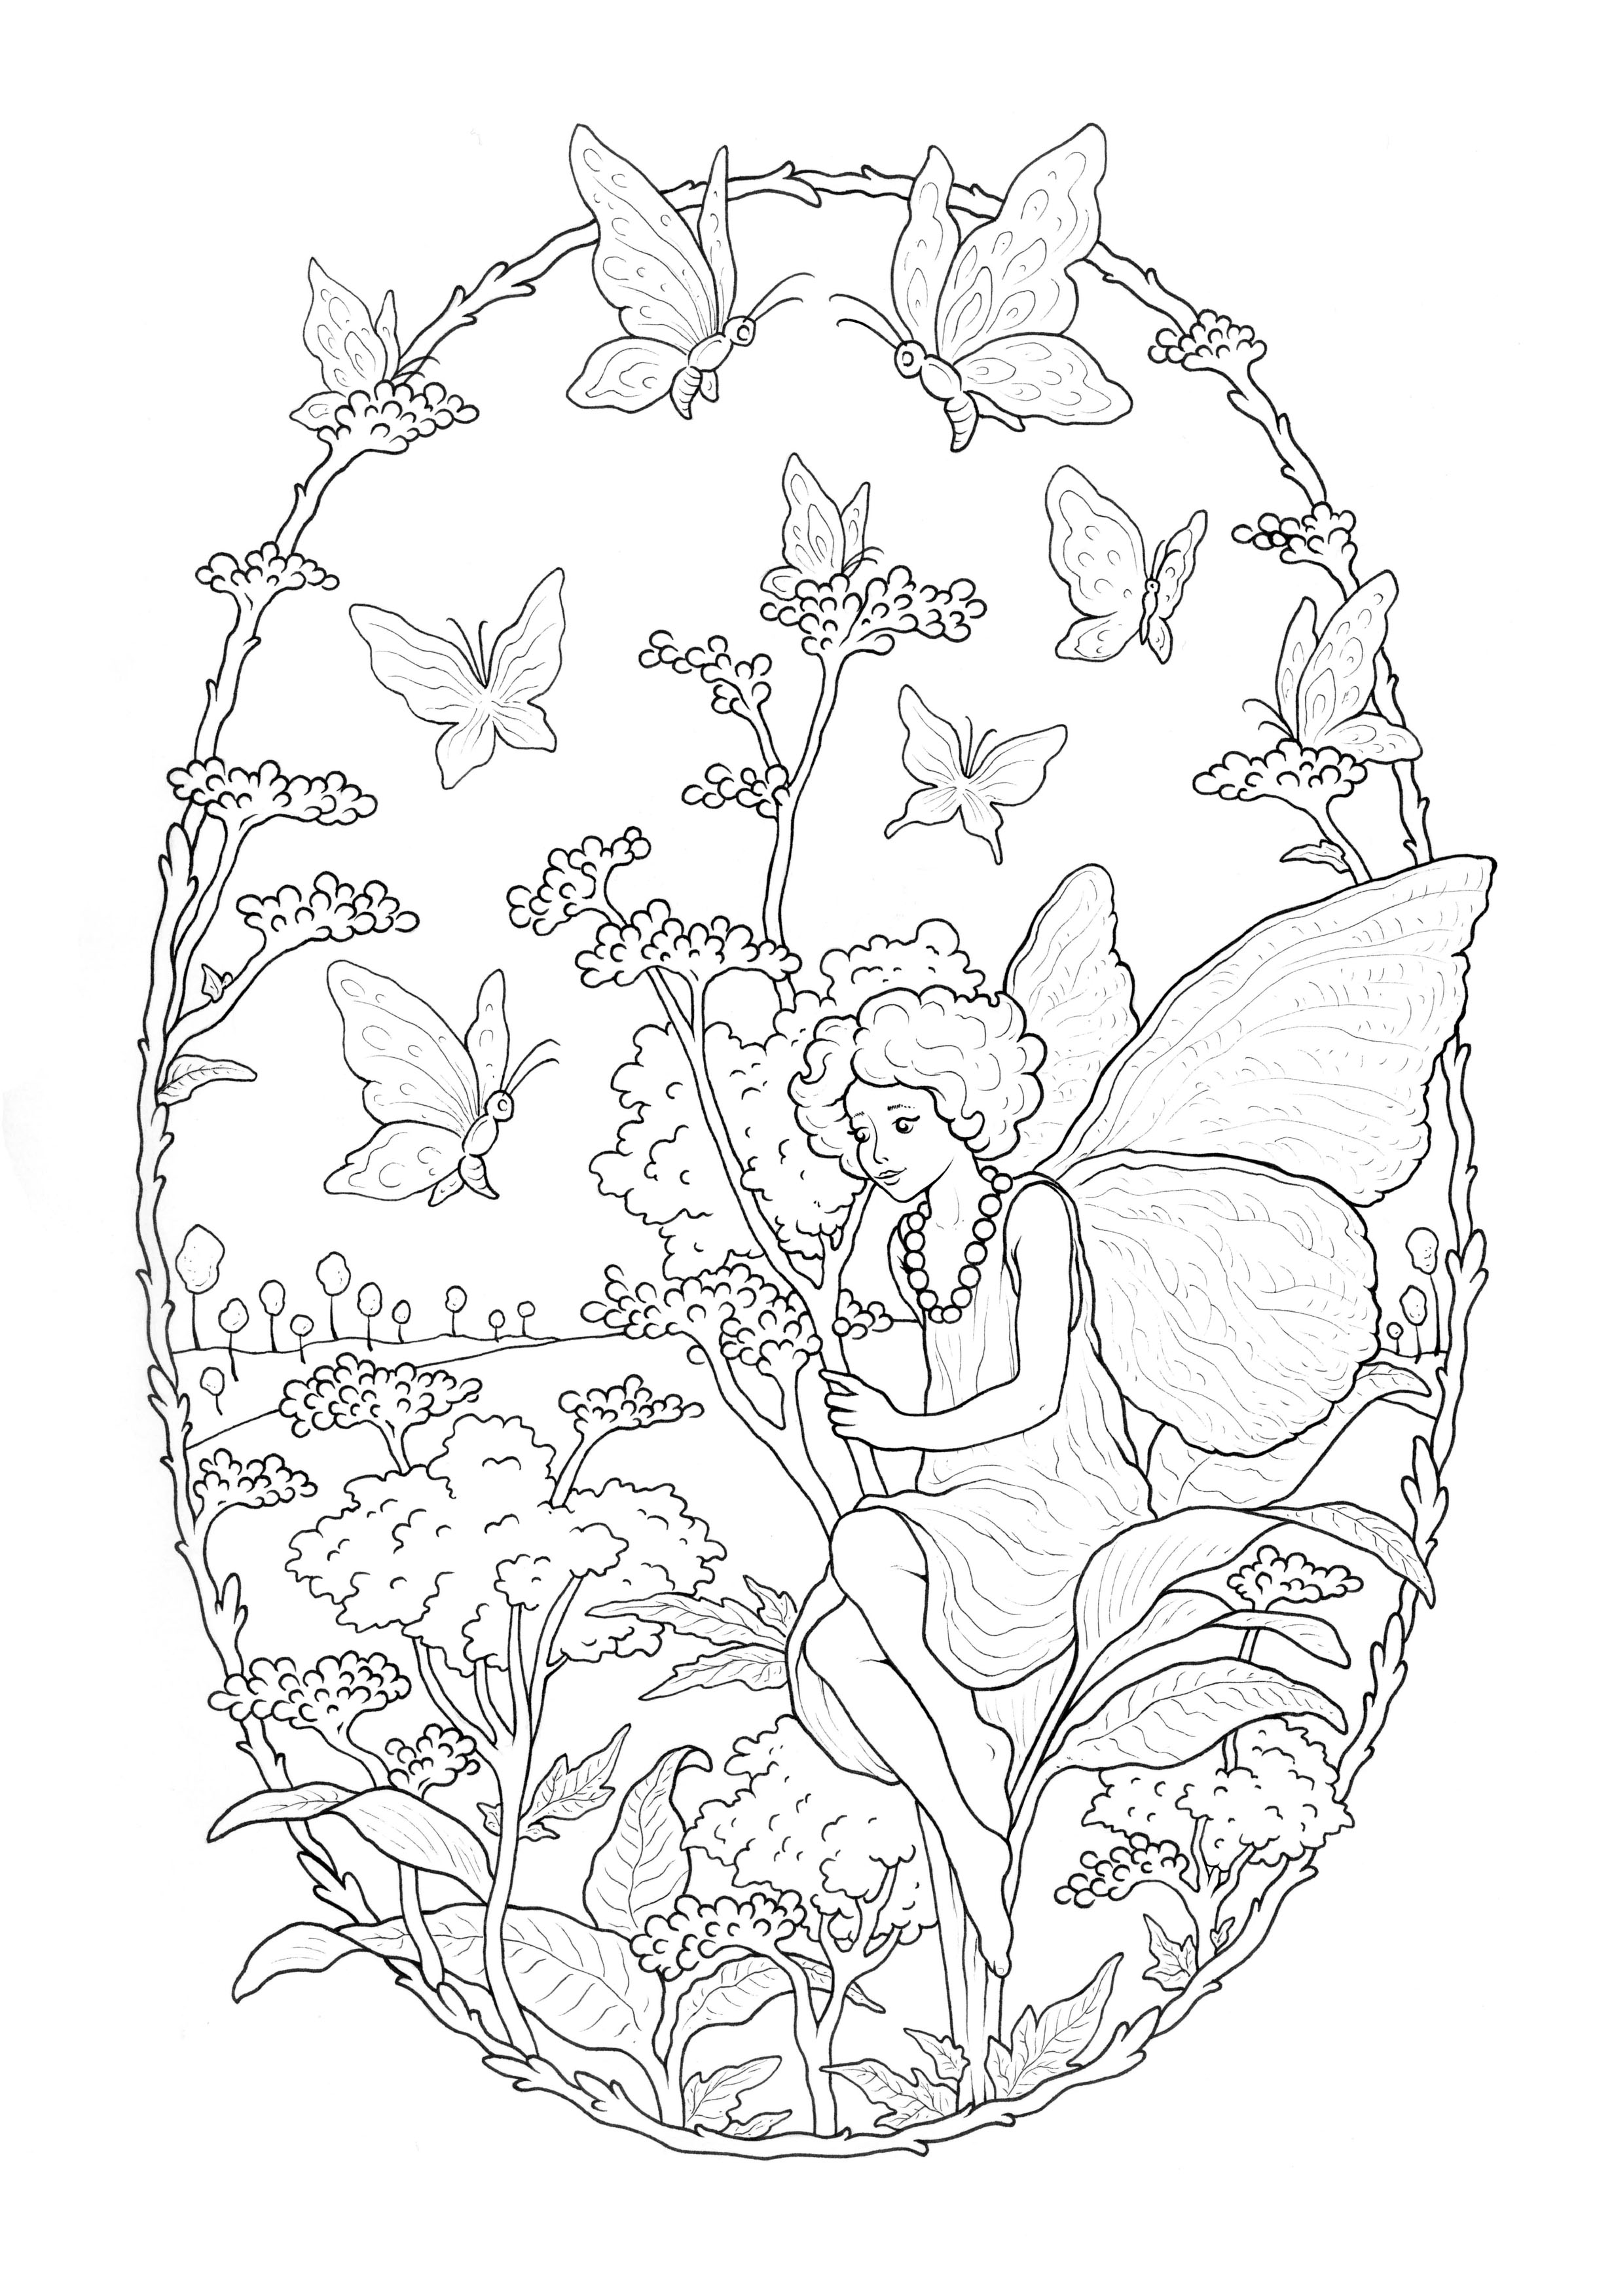 27+ Wreath Coloring Page Medal coloring page at getcolorings.com